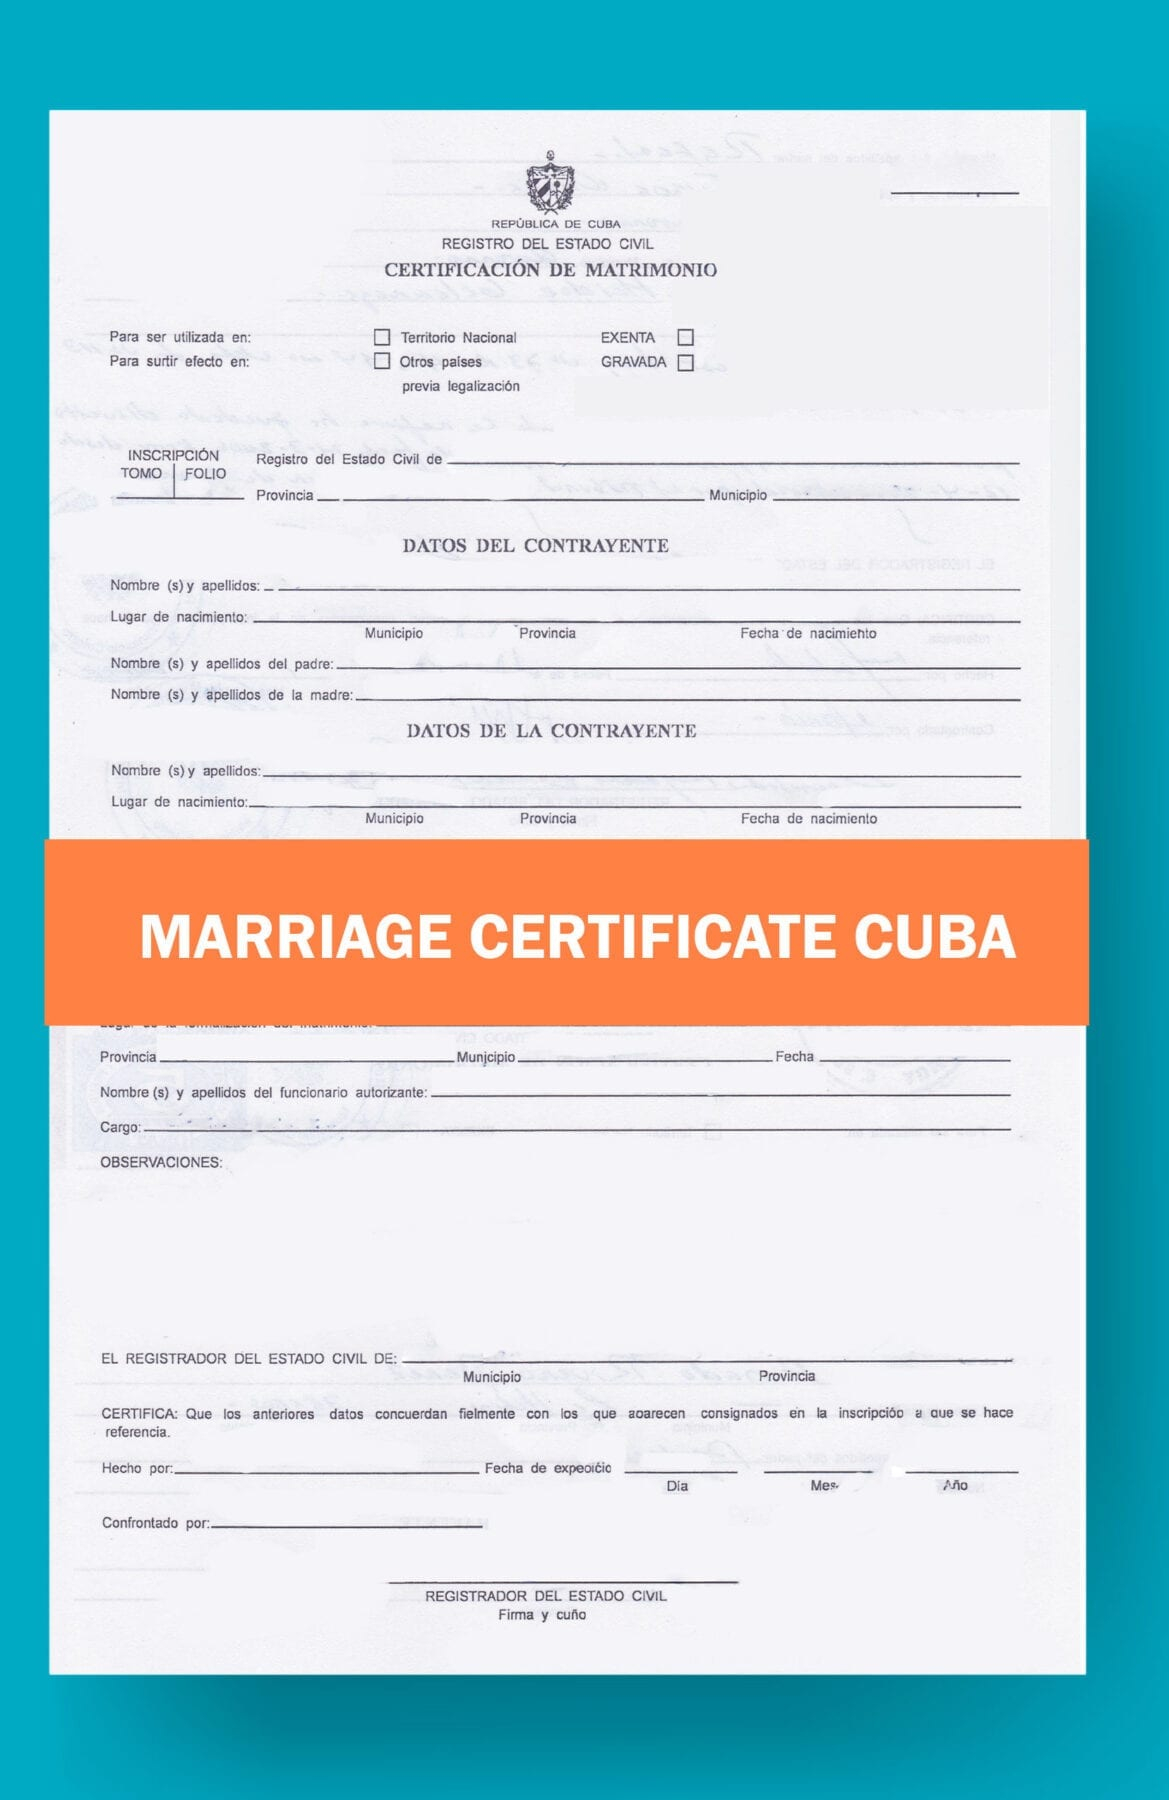 Marriage Certificate Translation $10 pp delivery same day no extra  For Marriage Certificate Translation From Spanish To English Template